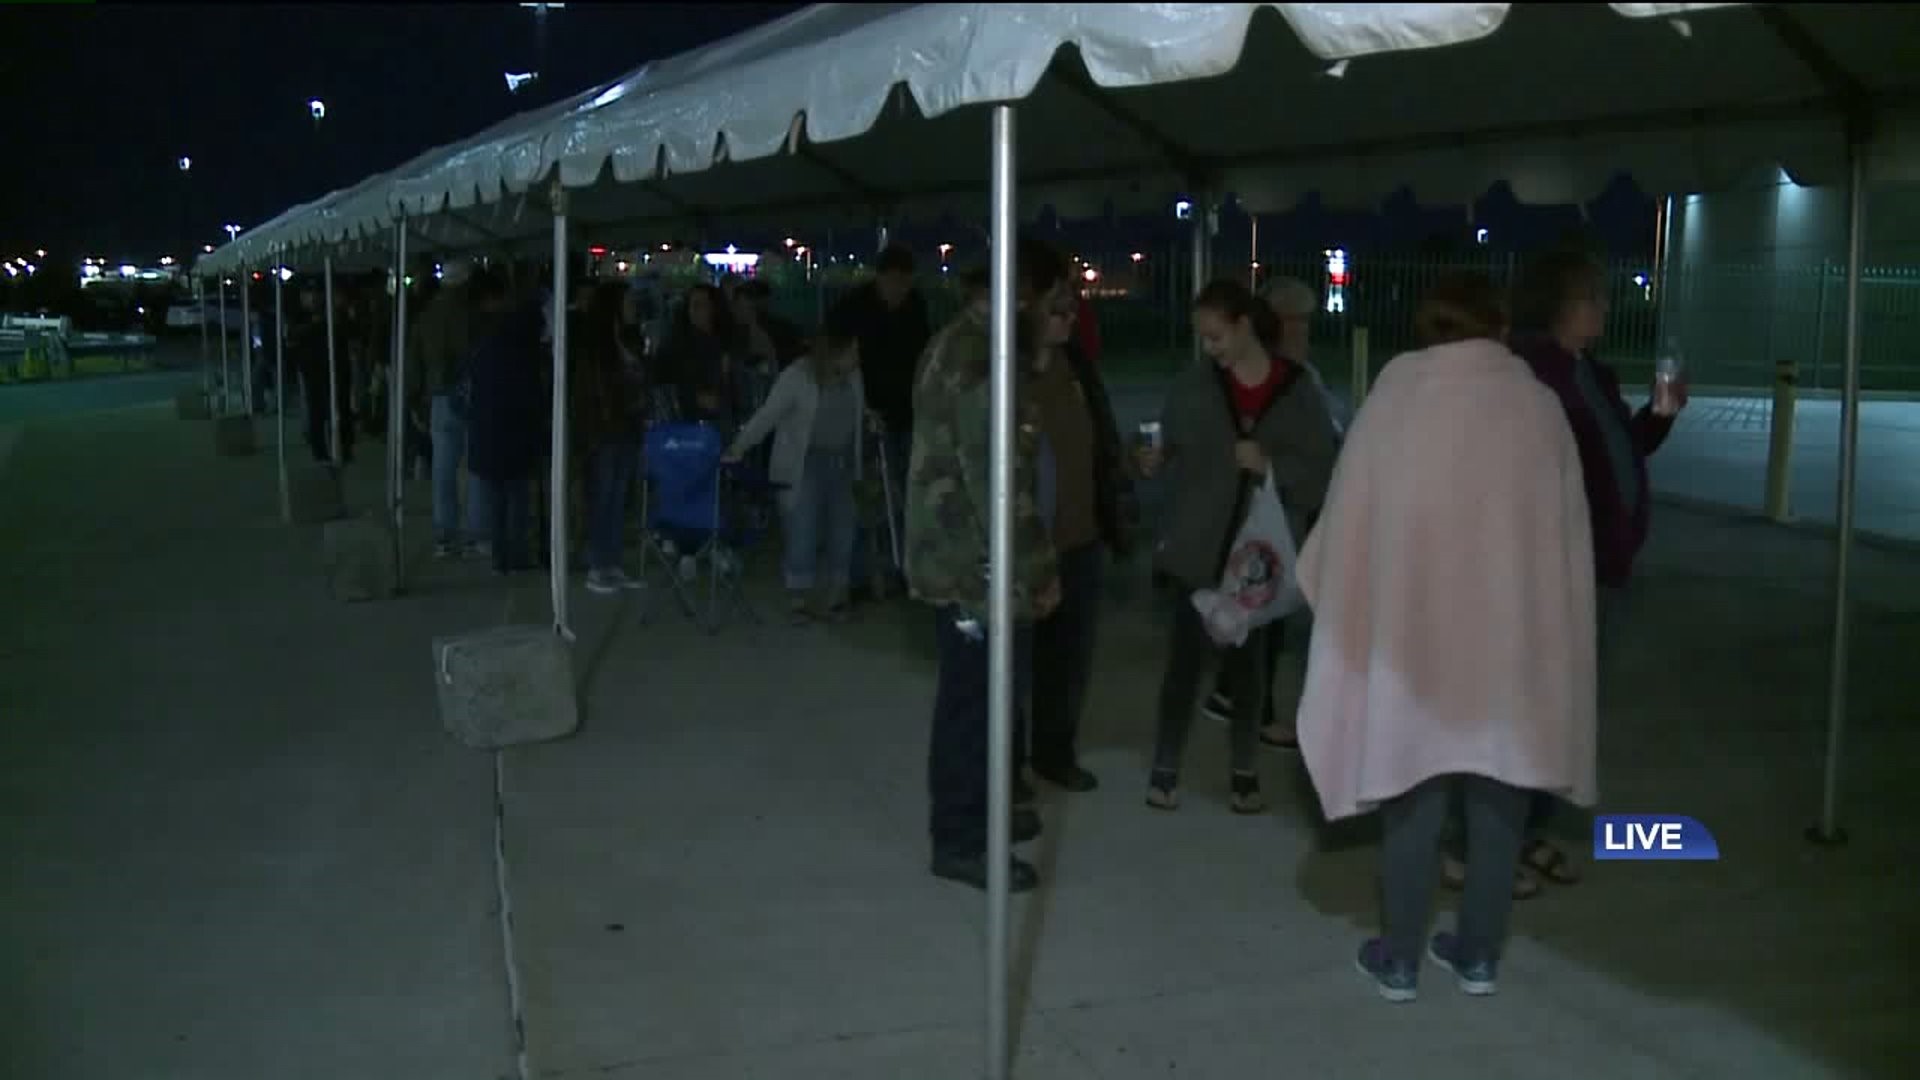 People Turnout for Free Dental Care in Luzerne County